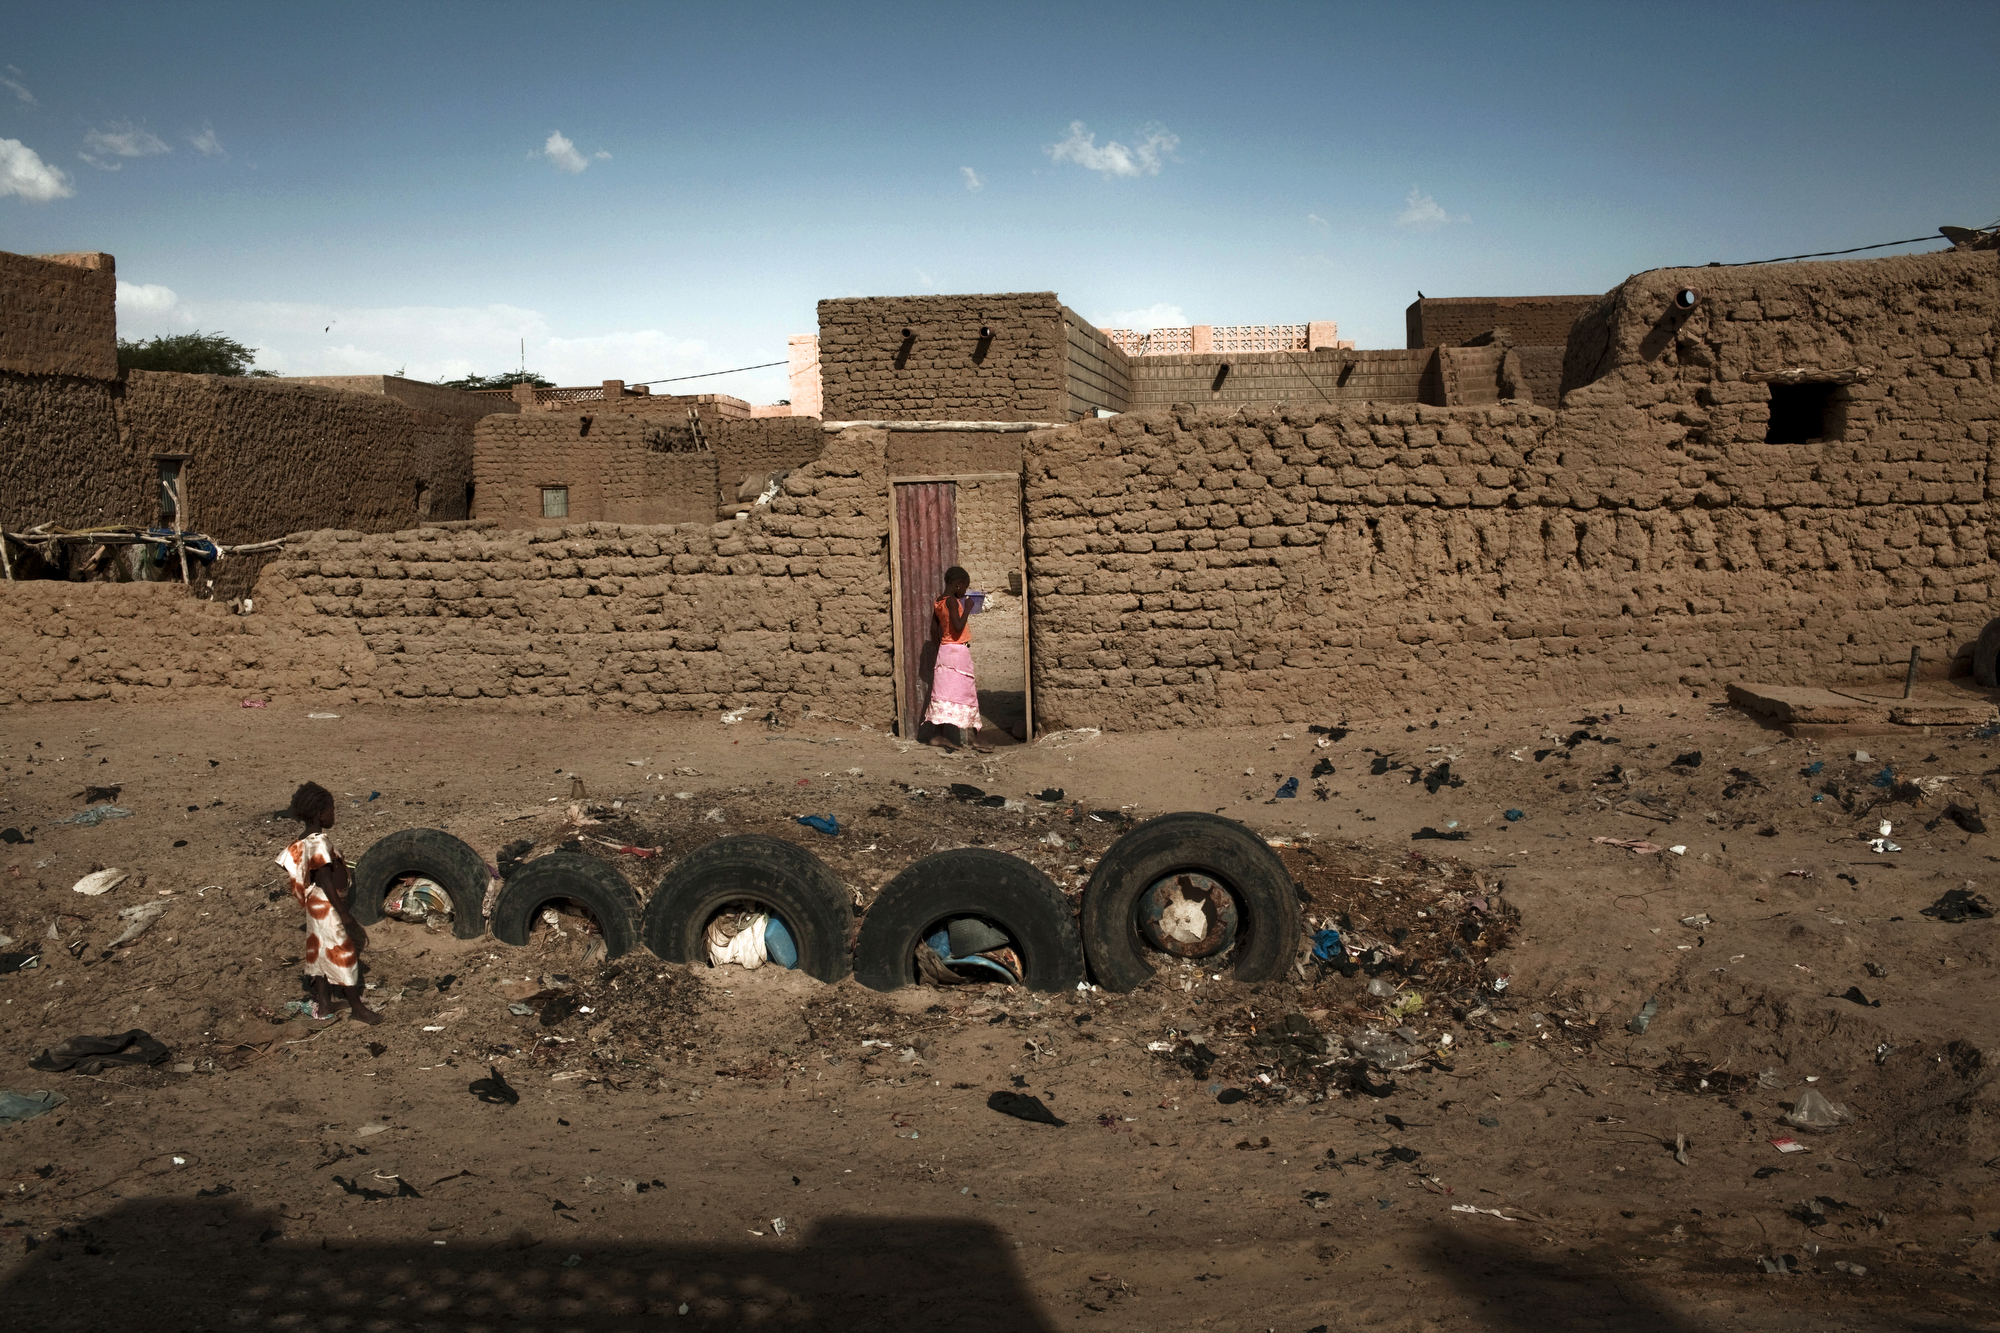  TIMBUKTU, Mali. OCTOBER 2013. Tires outside a home in Timbuktu, Mali, meant to protect against flooding. Timbuktu and much of Mali's northern towns still suffer from a lack of power, resources and food.

Summary: Mali, a predominantly Muslim country